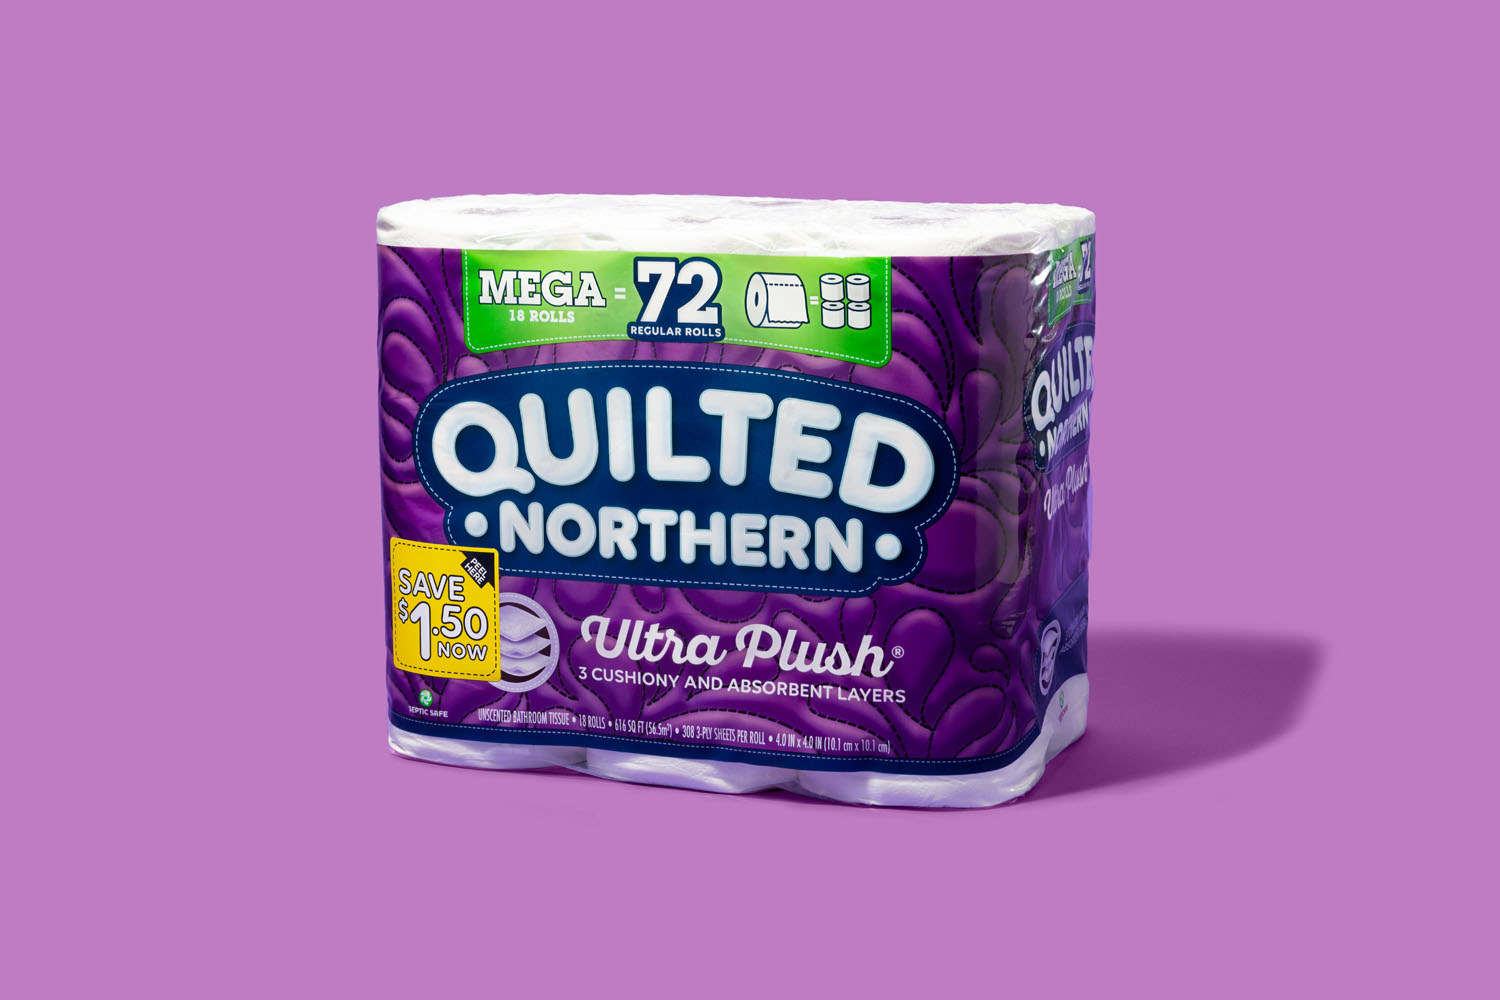 Quilted Northern Bathroom Tissue Ultra Plush Unscented - 9 CT, Toilet  Paper